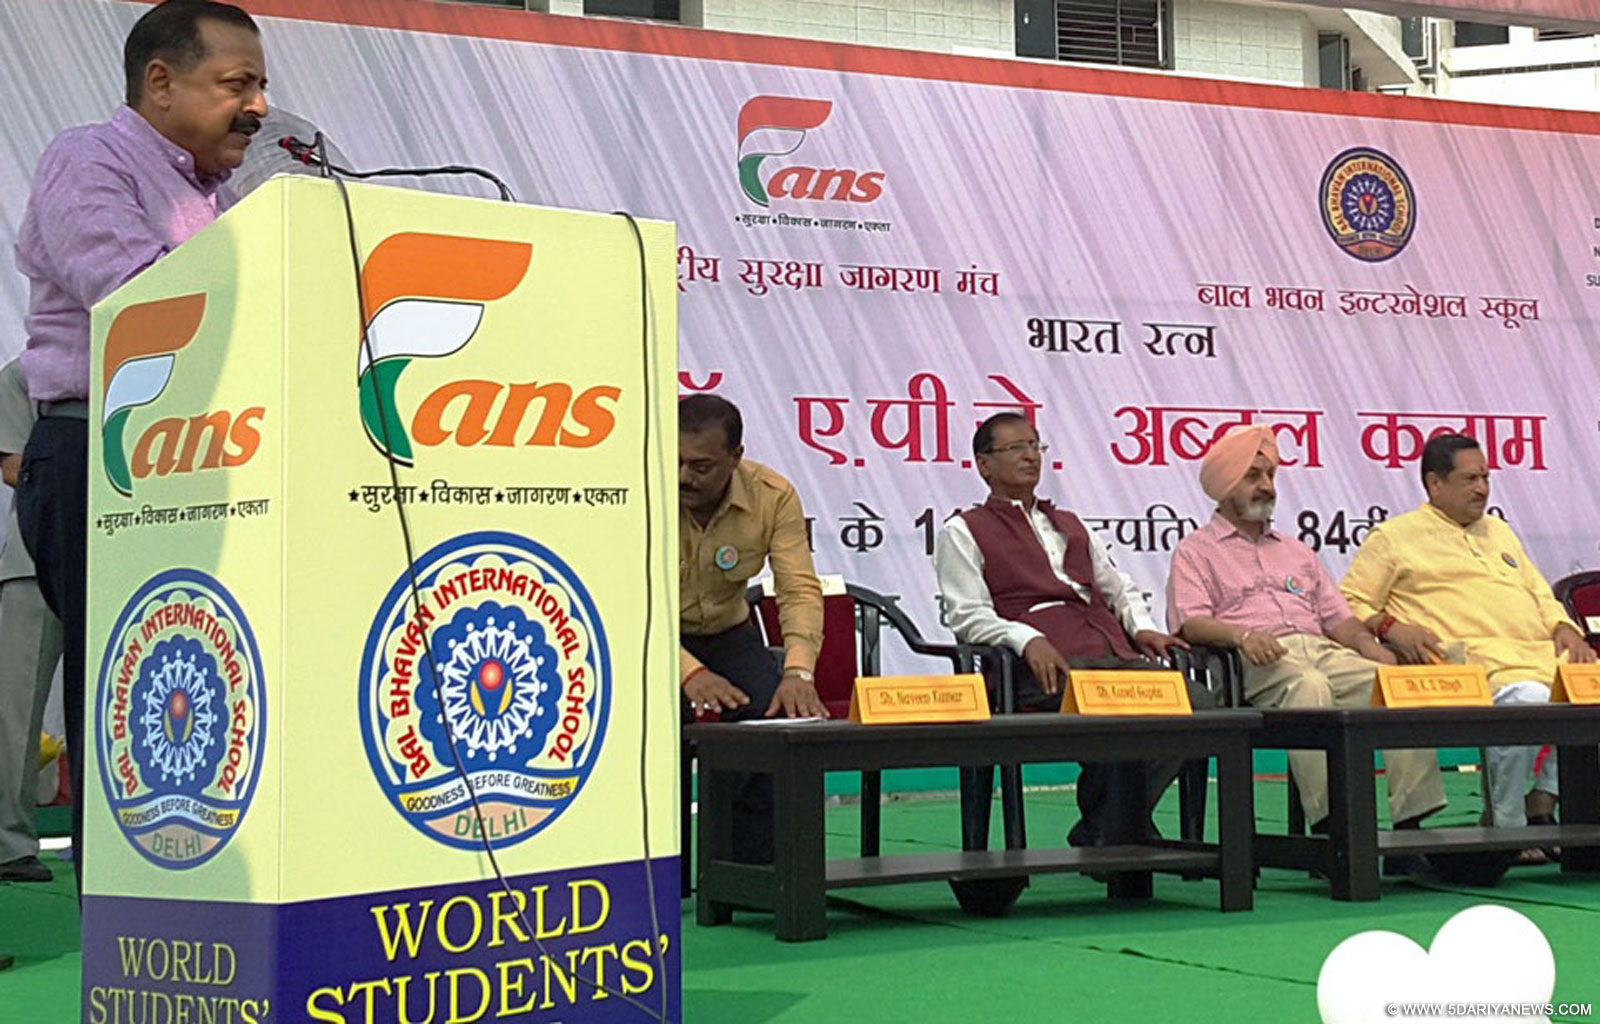 Dr. Jitendra Singh addressing the students on the eve of "World Students